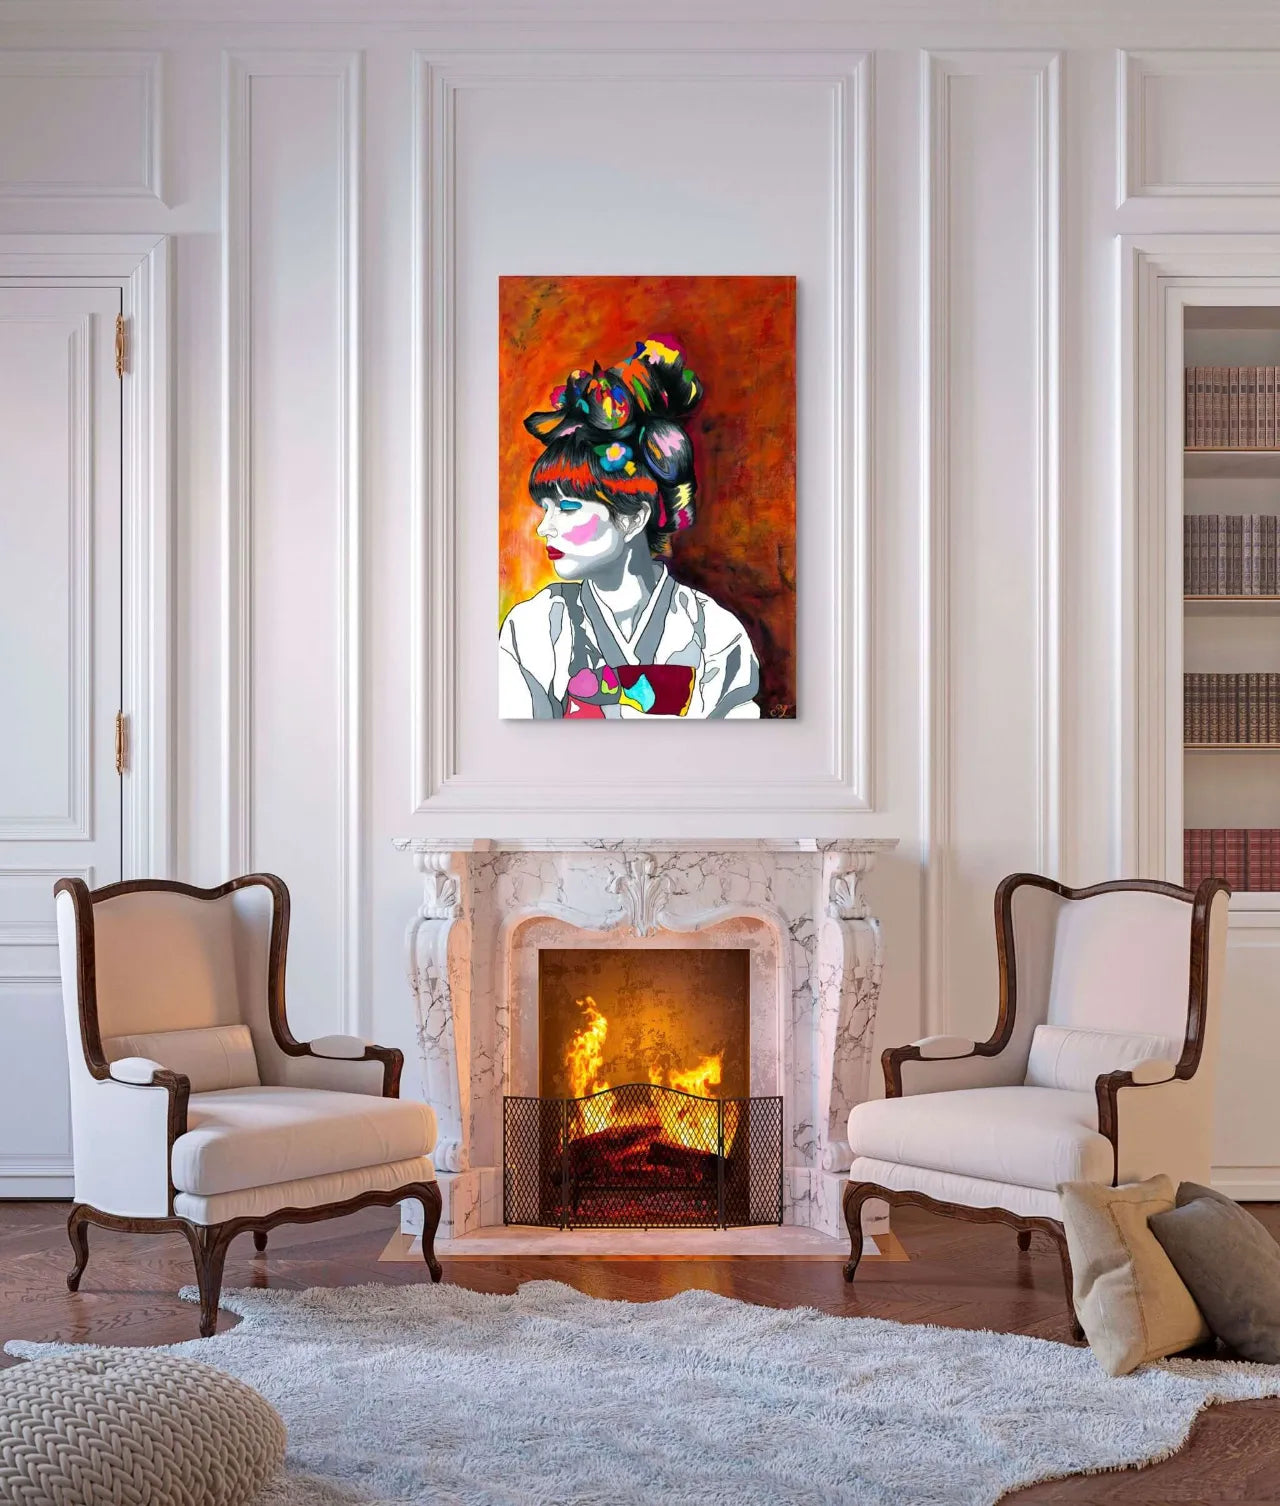 Abstract-Artwork-by-Sung-Lee-Lost-Identity-Katie-Fireplace-Original-Painting-on-Canvas-Australia